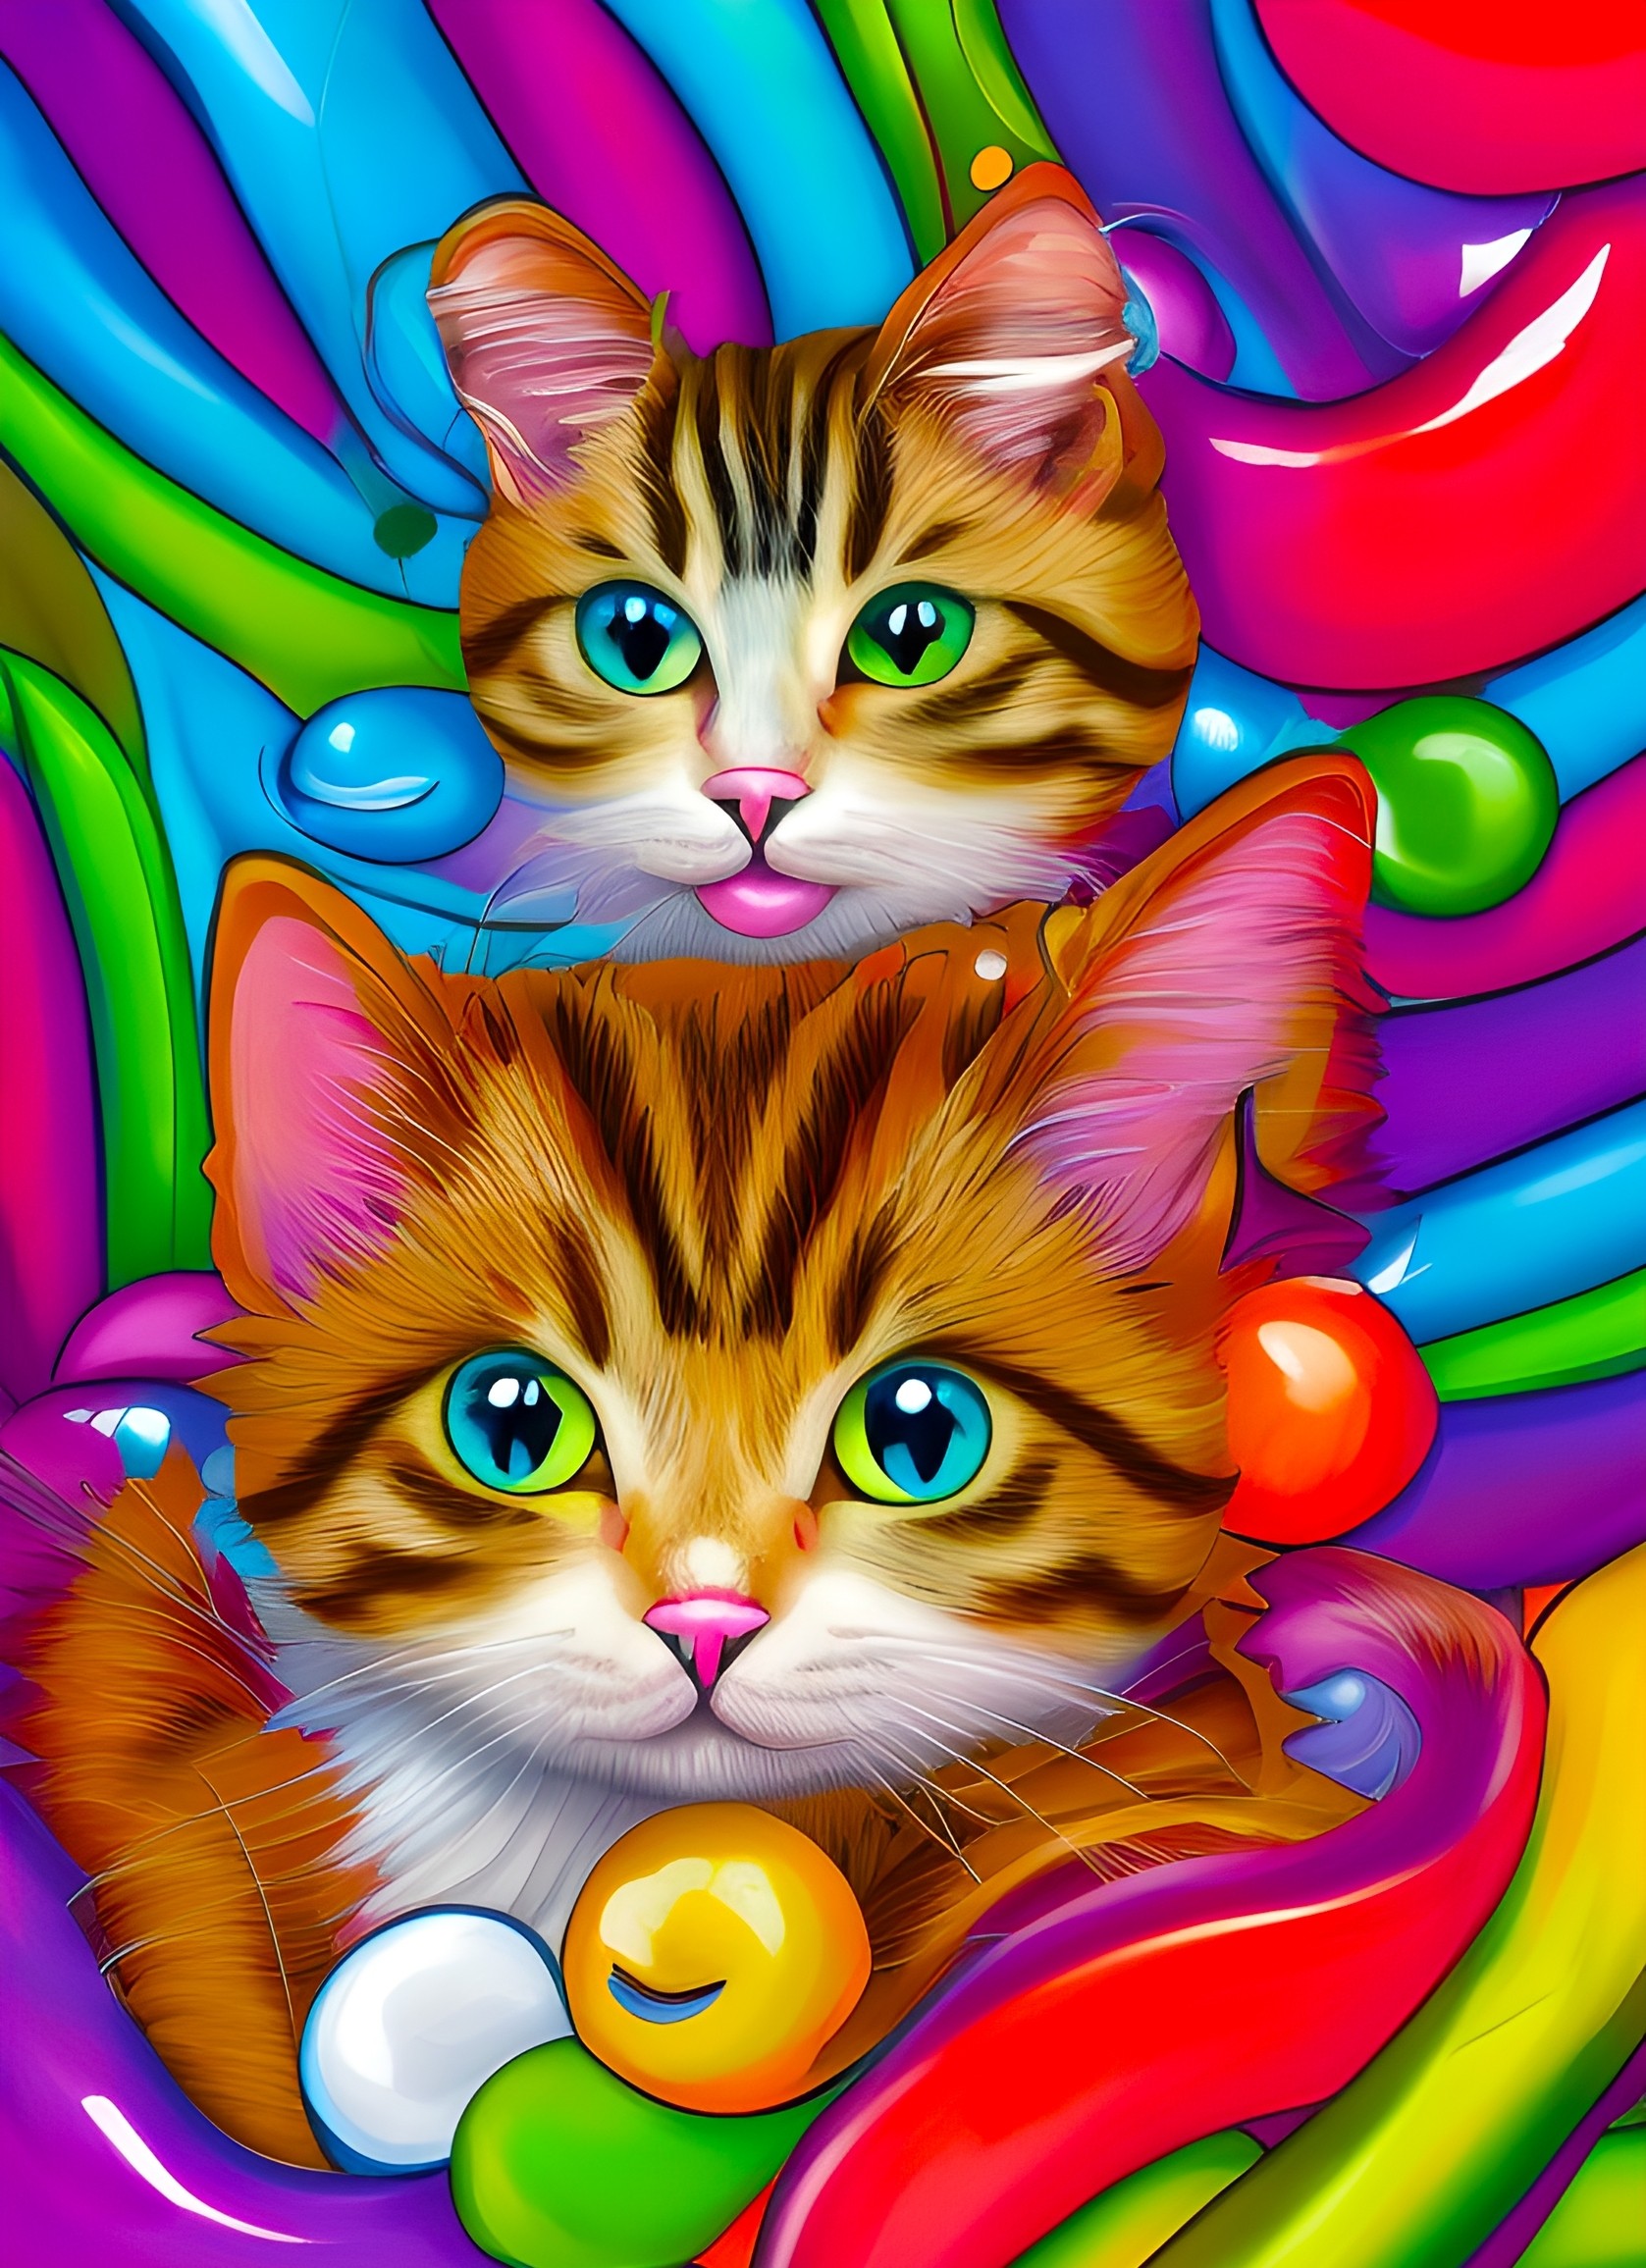 Cat Colourful Art Blank Greeting Card